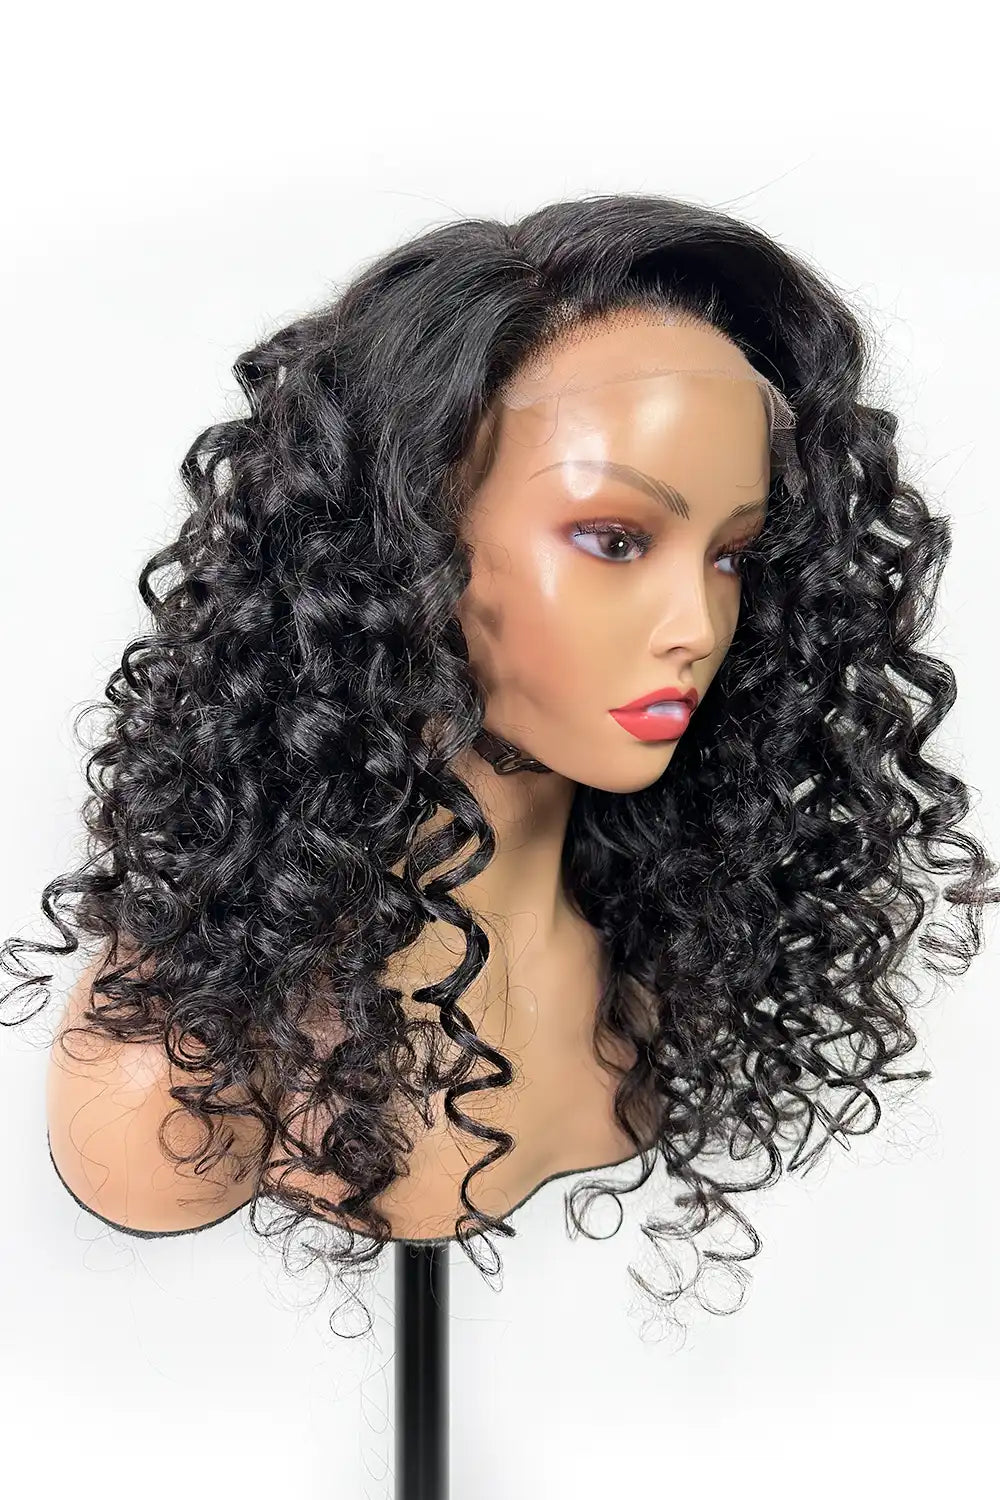 5x5-guleless-hd-lace-closure-wig-side-part-curly-black-hair-2